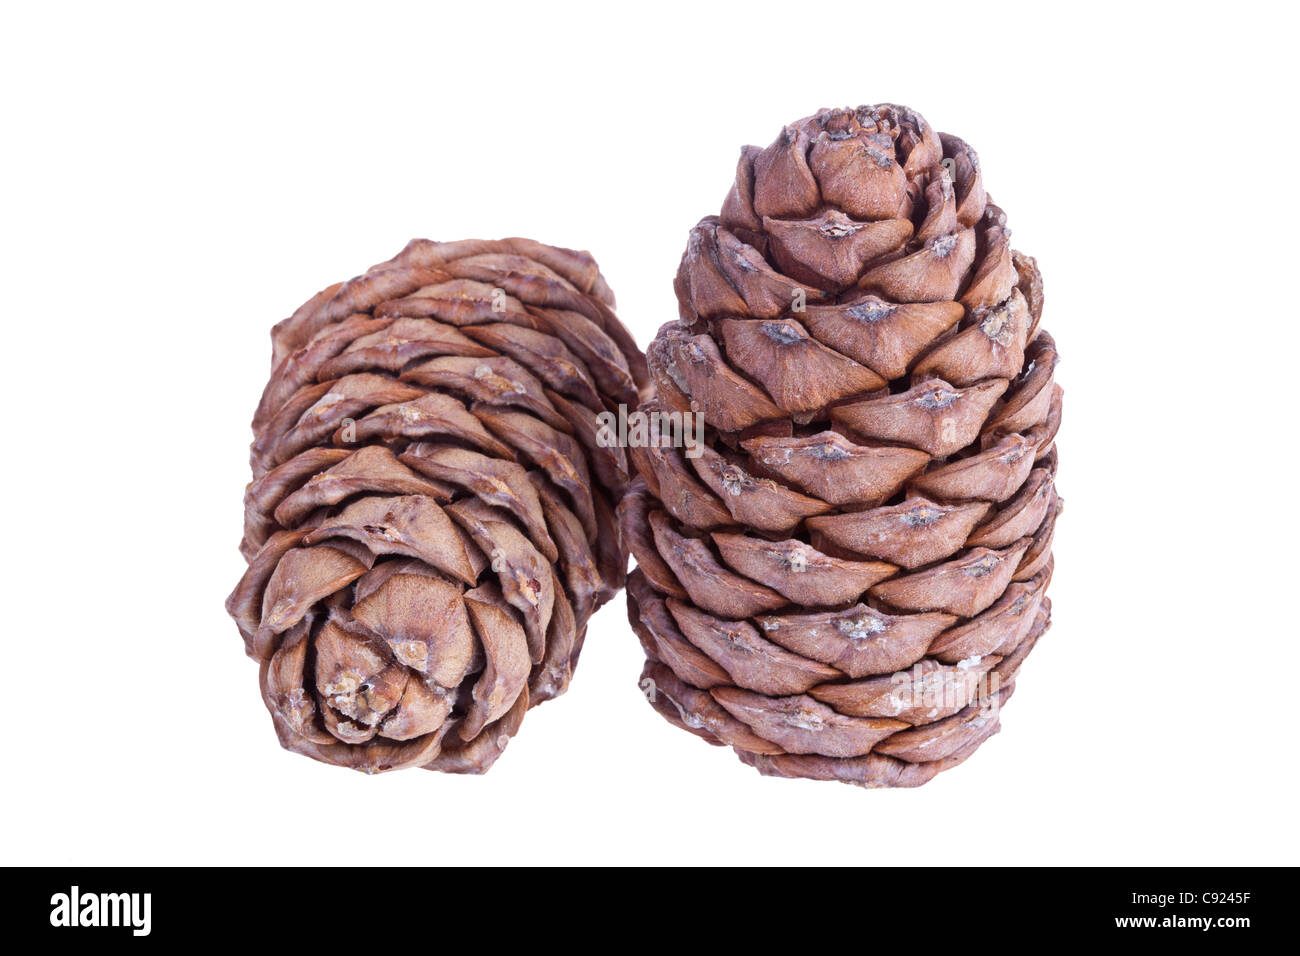 Siberian pine cone isolated on white Stock Photo